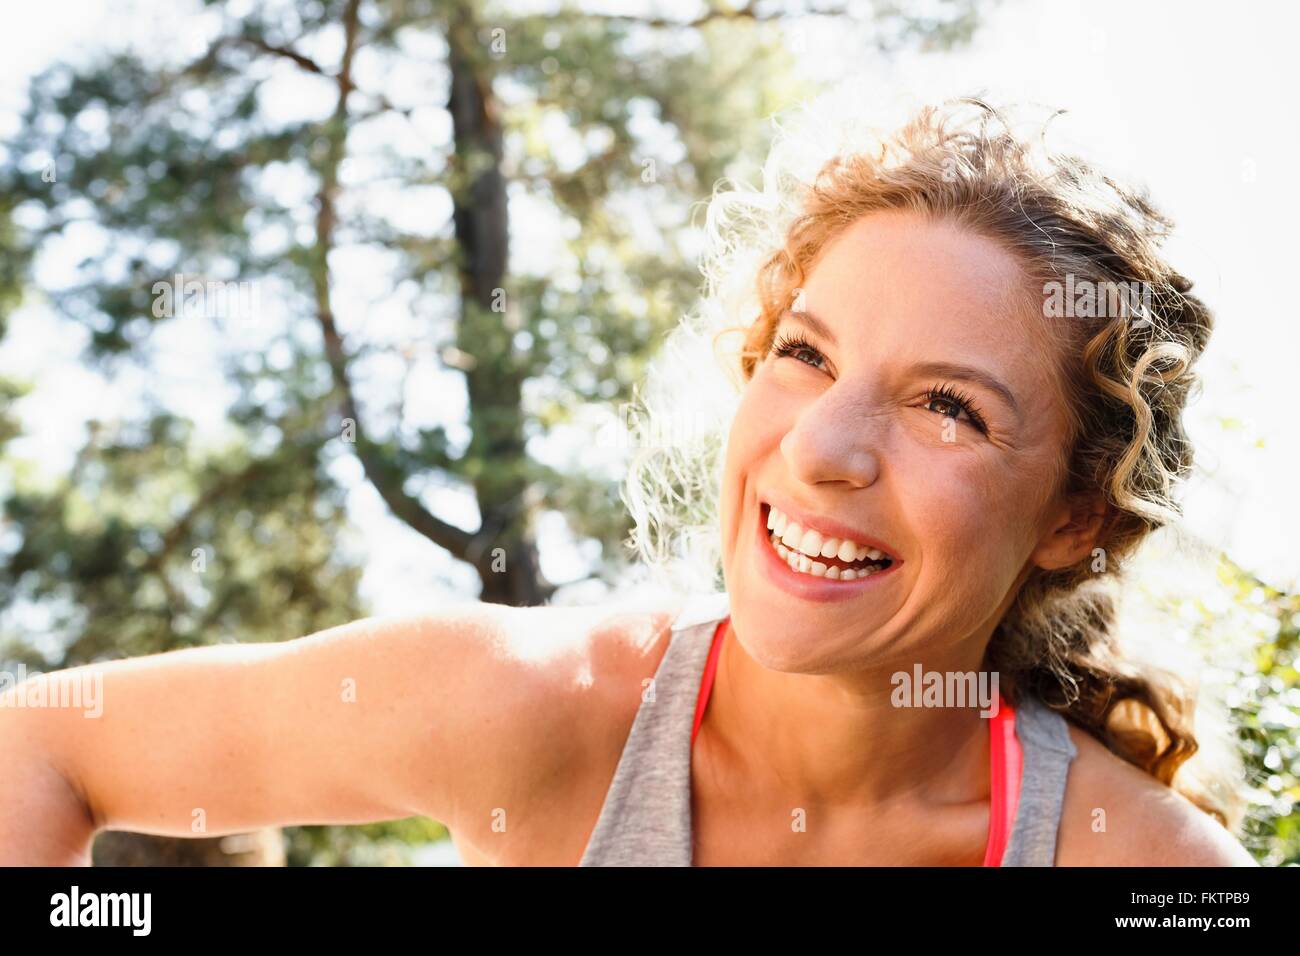 Young woman looking away smiling, portrait Stock Photo